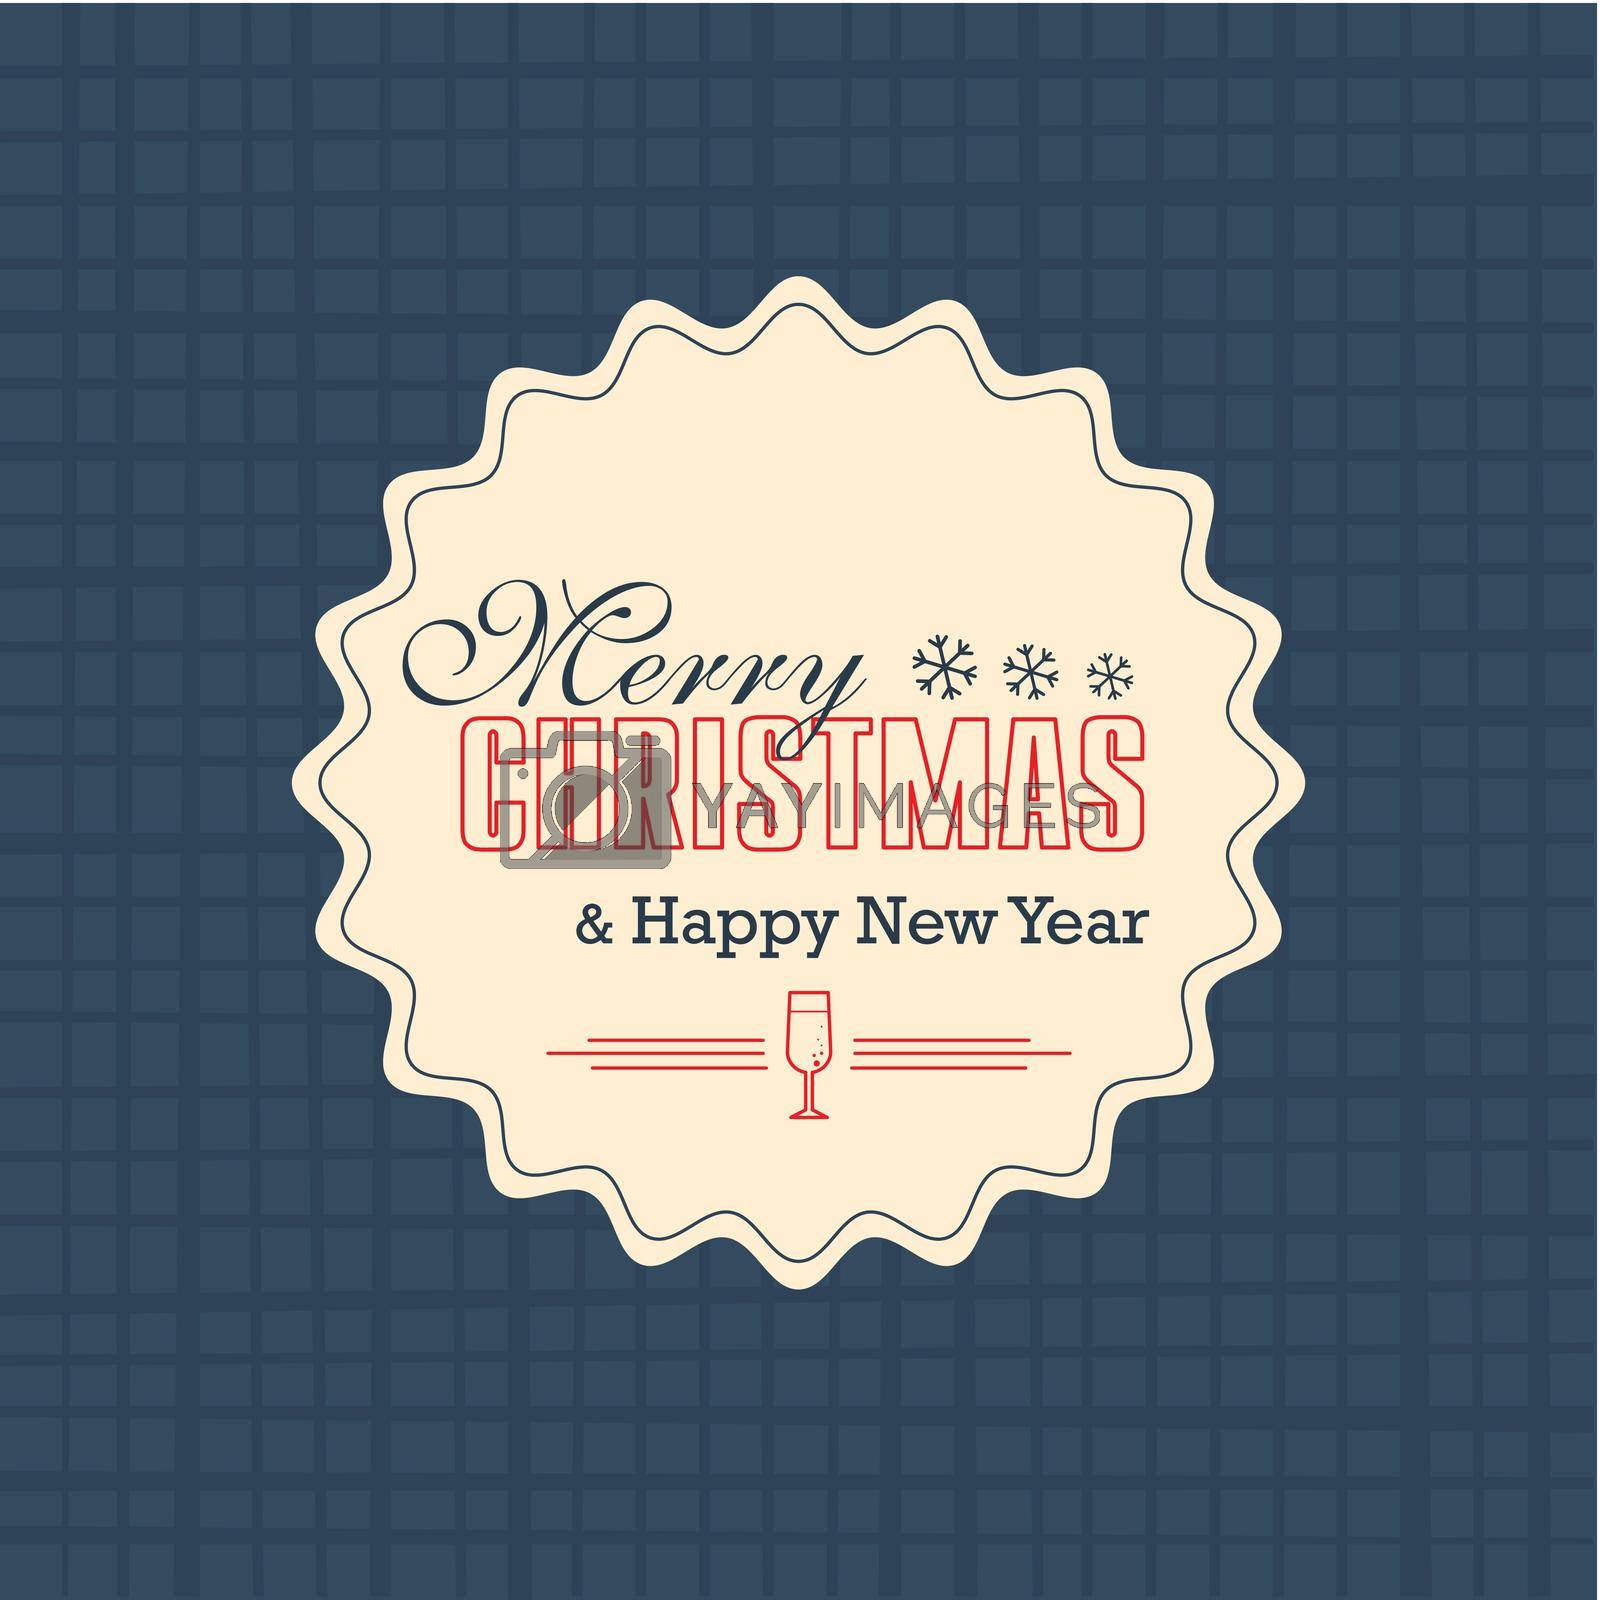 Royalty free image of Merry Christmas Card label by nosik